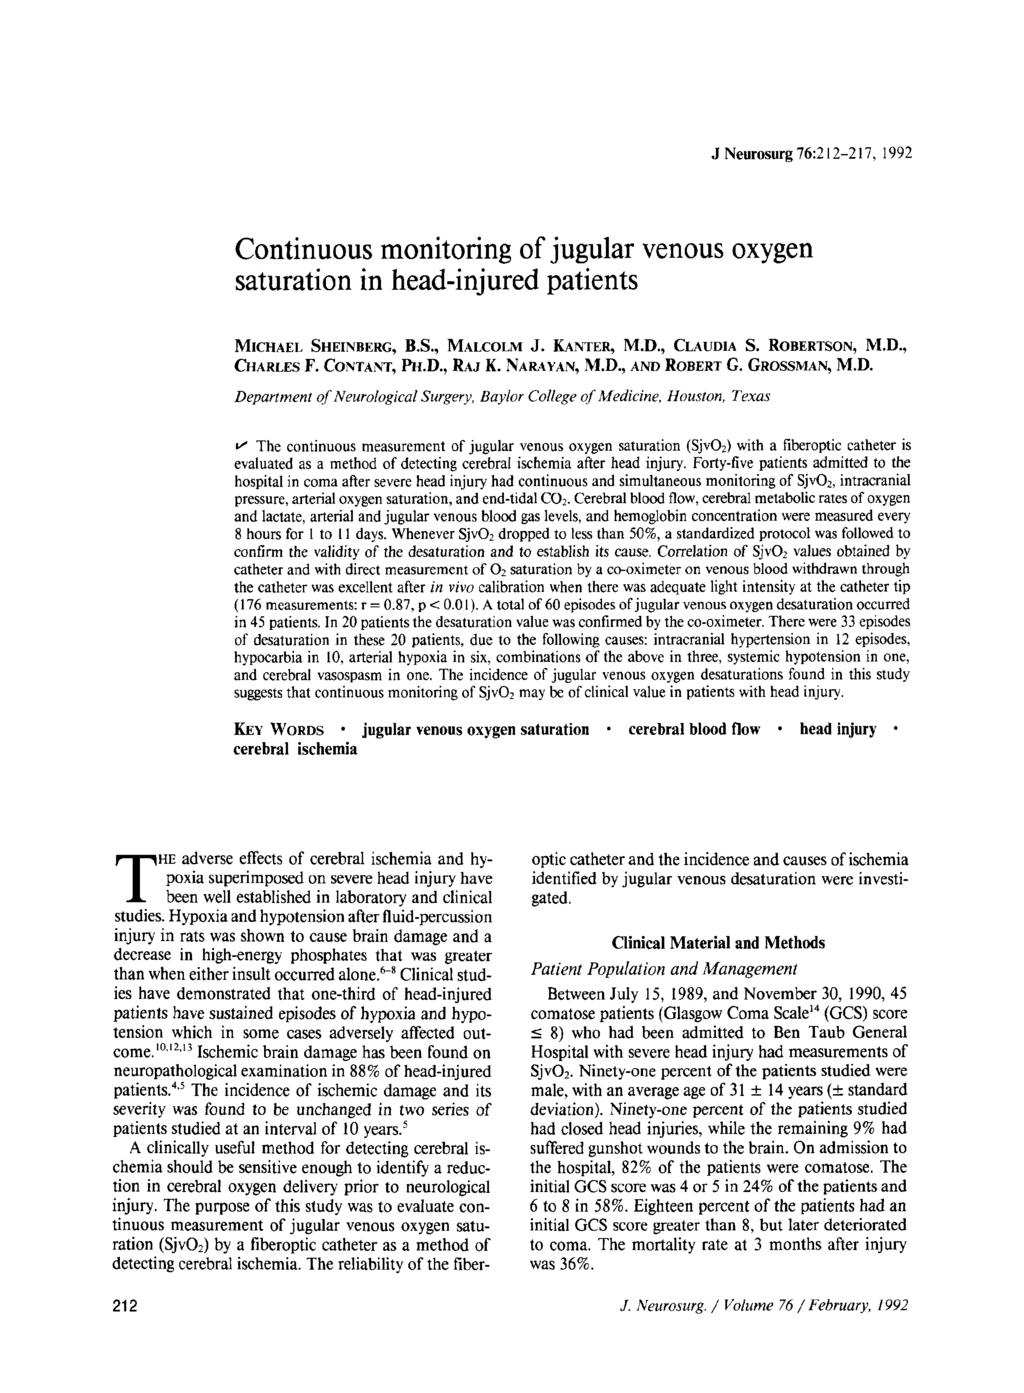 J Neurosurg 76:212-217, 1992 Continuous monitoring of jugular venous oxygen saturation in head-injured patients MICHAEL SHEINBERG, B.S., MALCOLM,J. KANTER~ M.D., CLAUDIA S. ROBERTSON, M.D., CHARLES F.